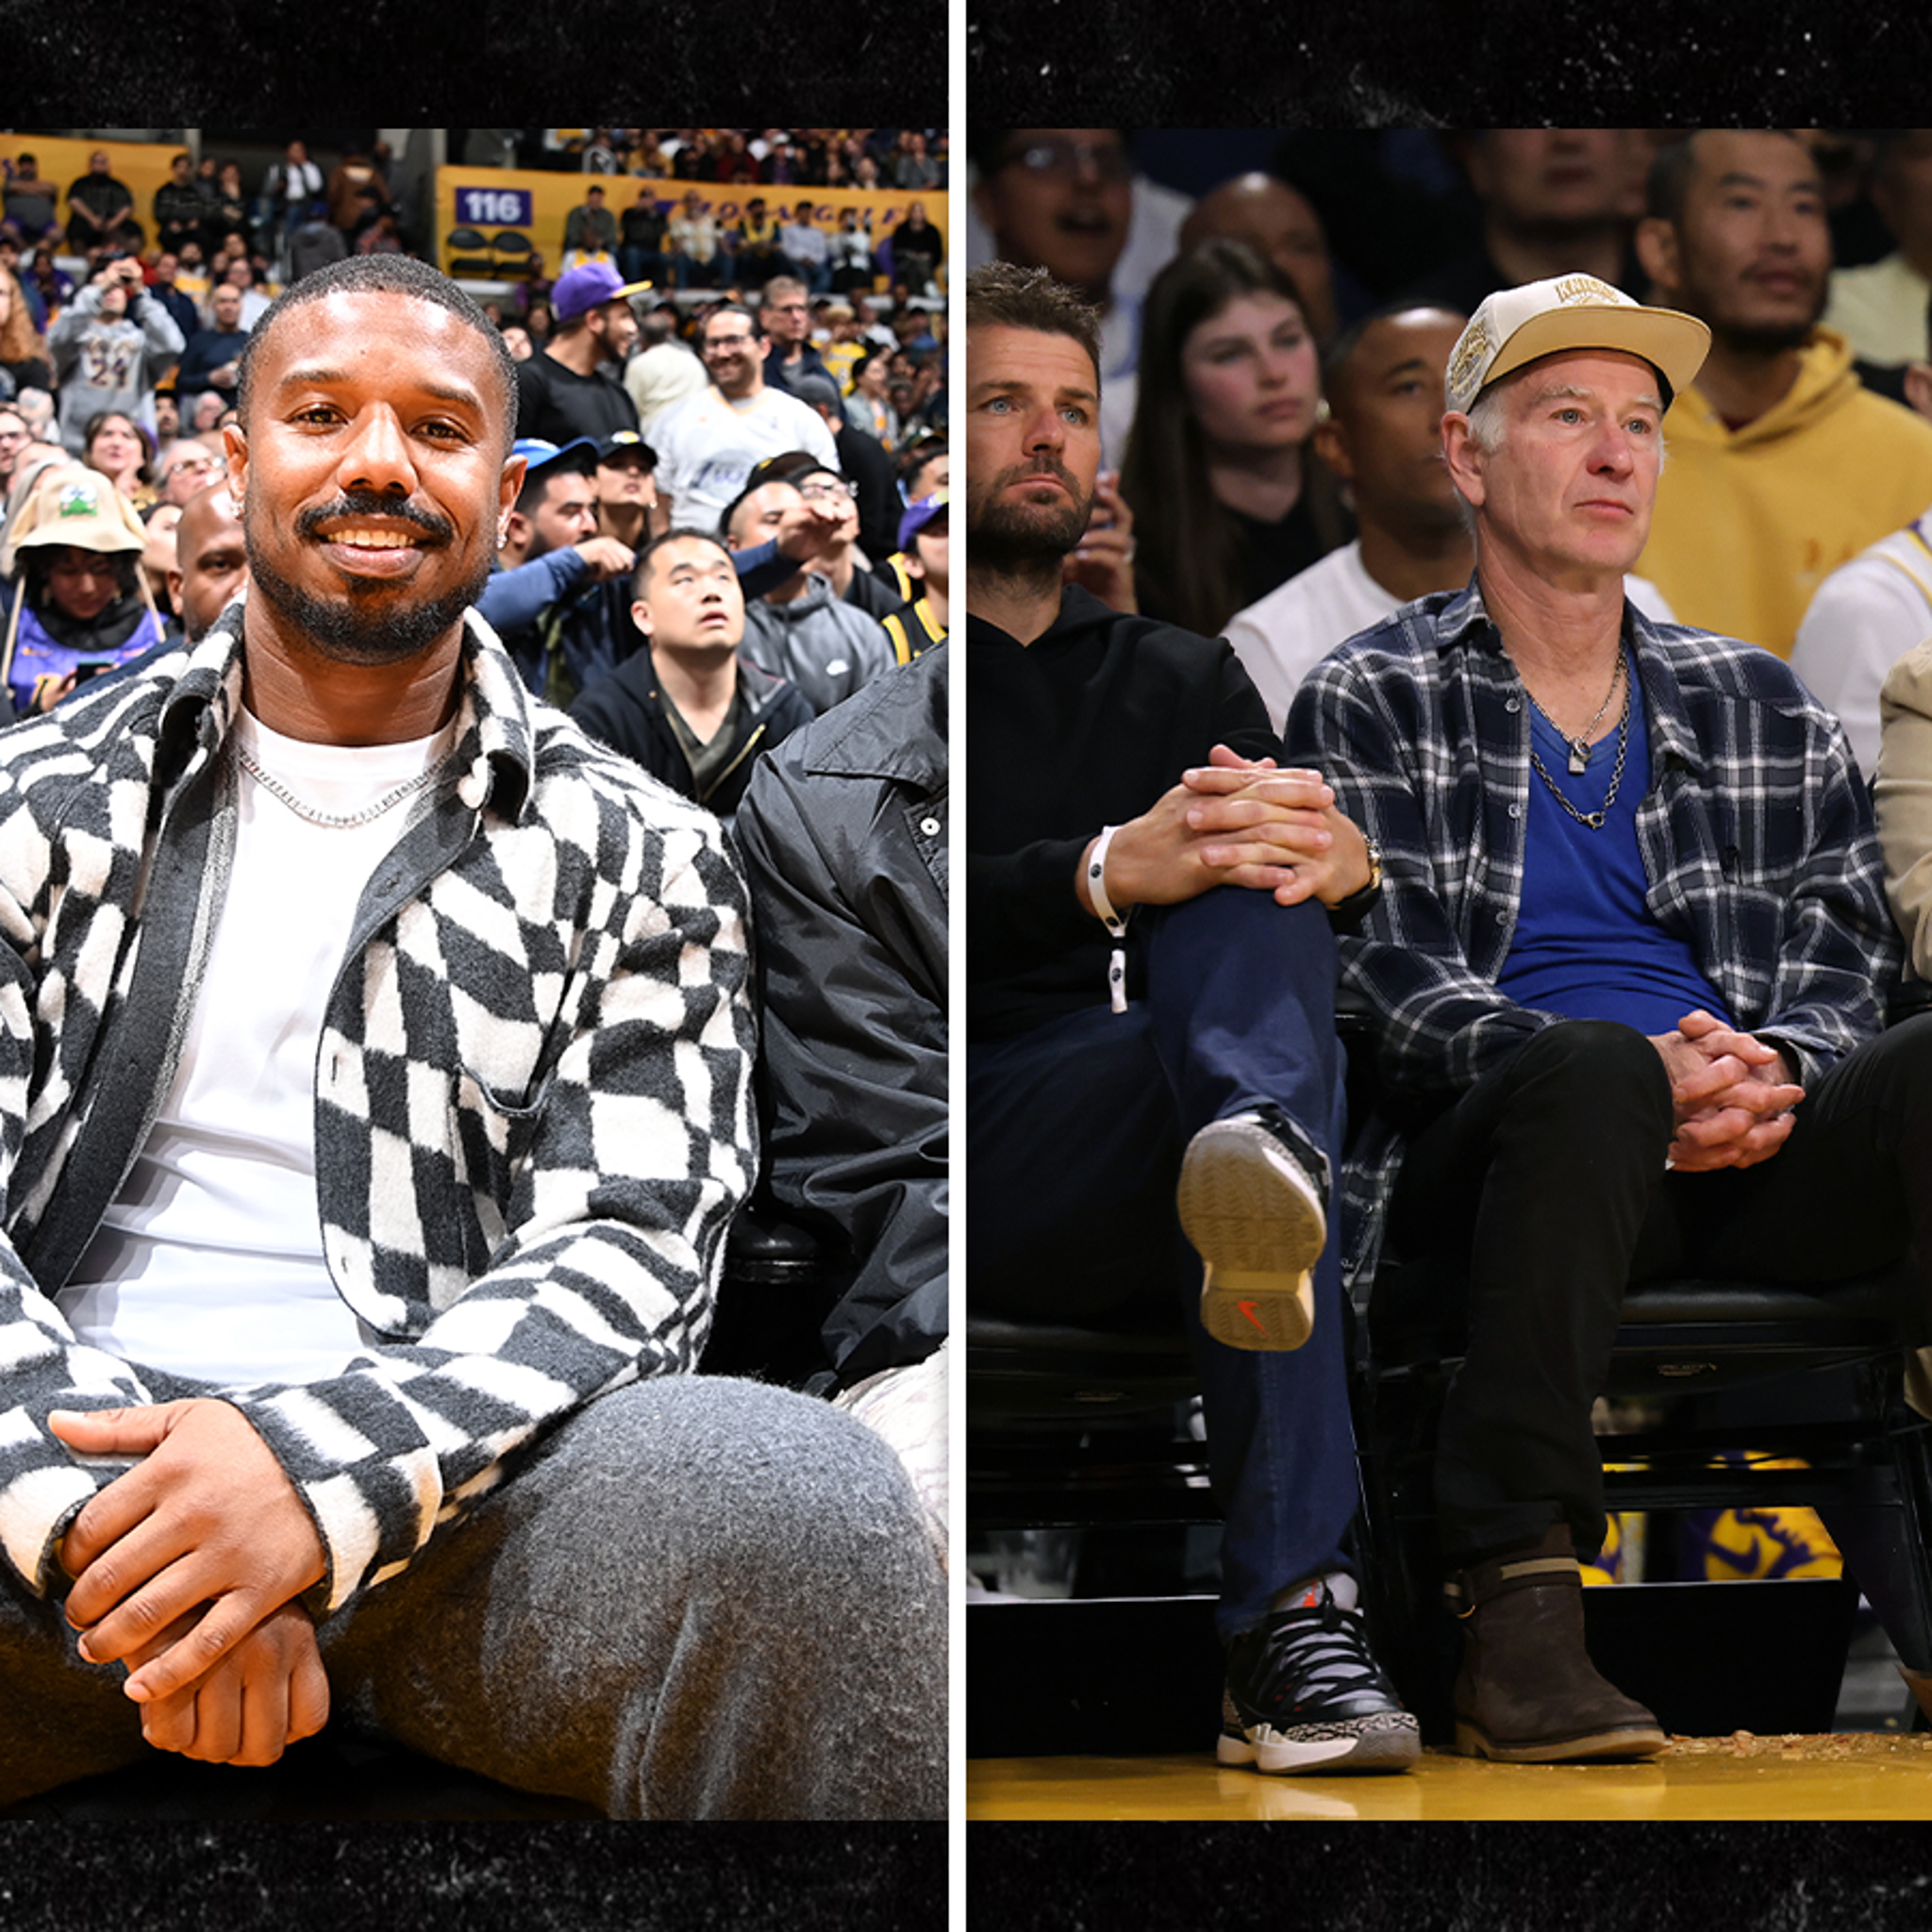 Celebs Pour Into Crypto Arena To Watch LeBron, Lakers Thrilling Win